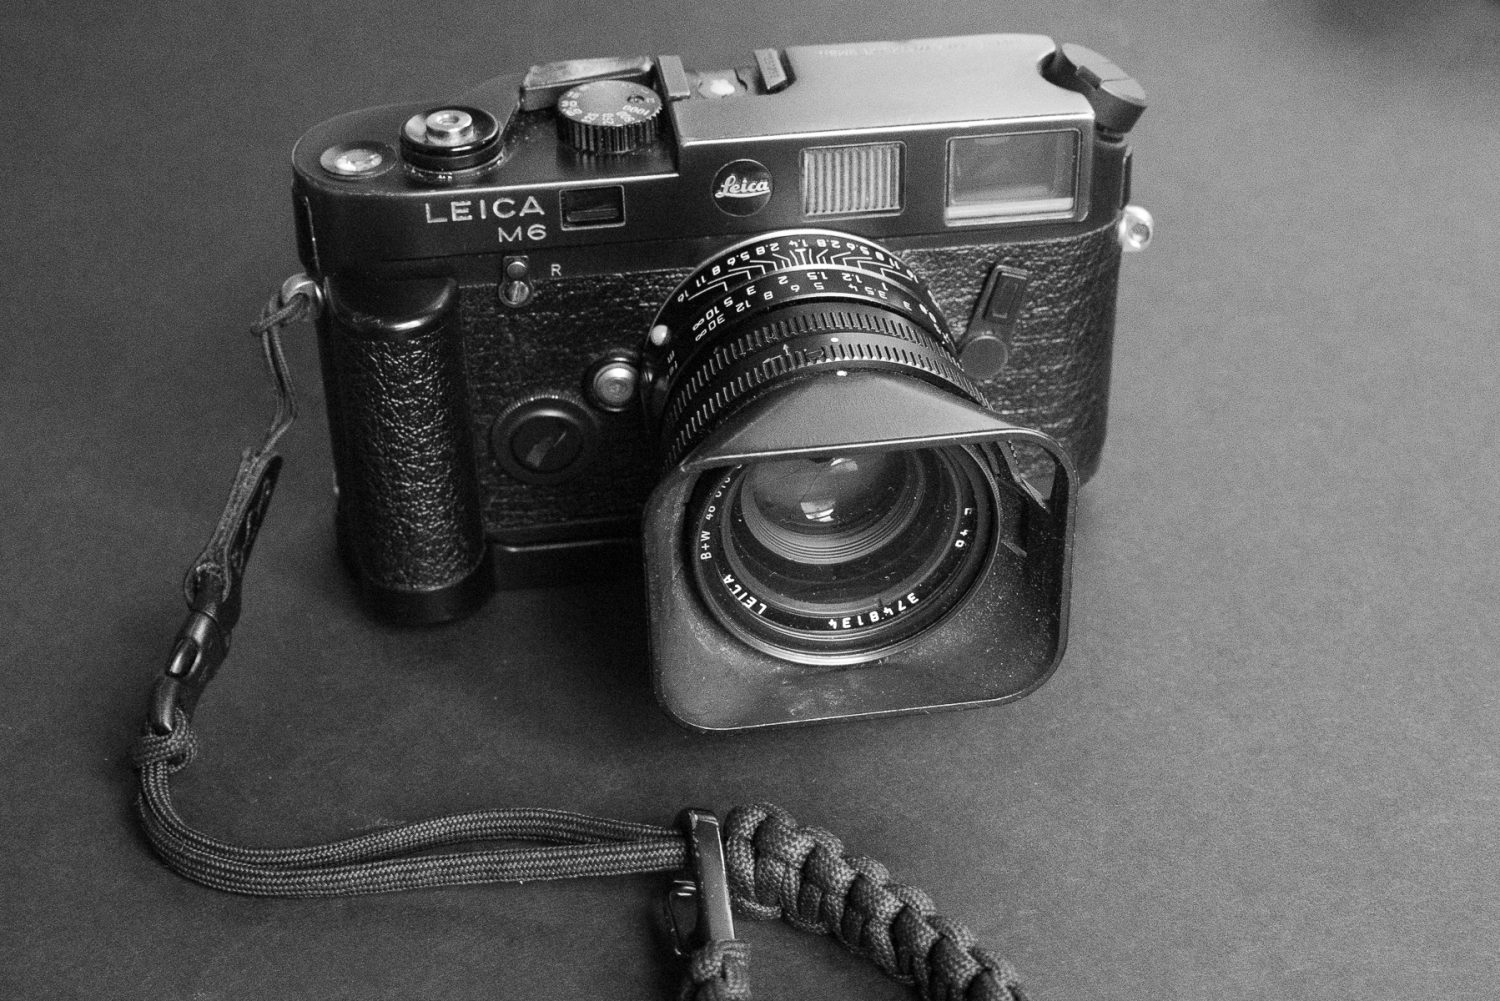 Leica M6 and a Summilux 35mm lens